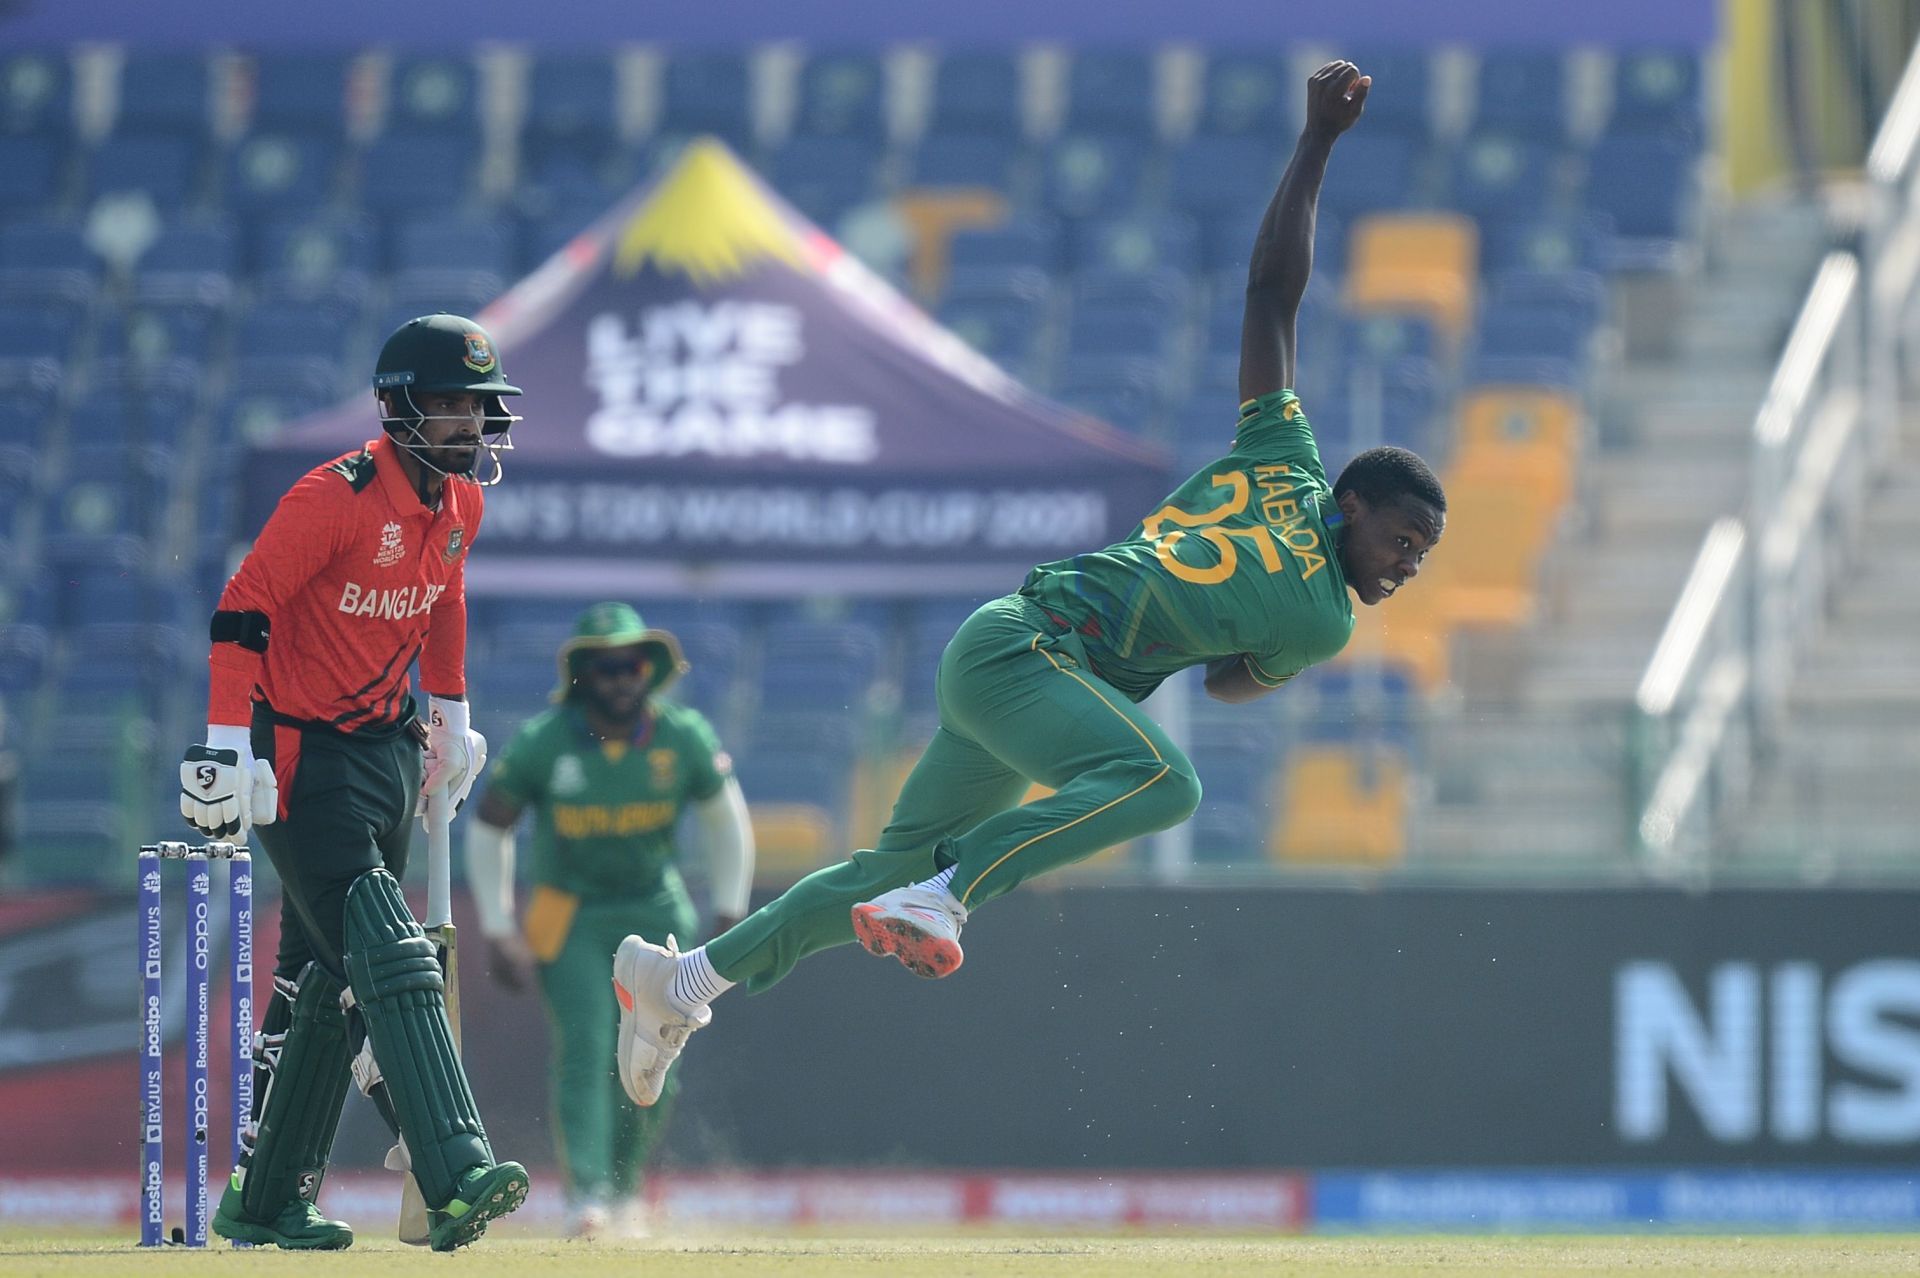 Kagiso Rabada is among the finest bowlers in the world at the moment.